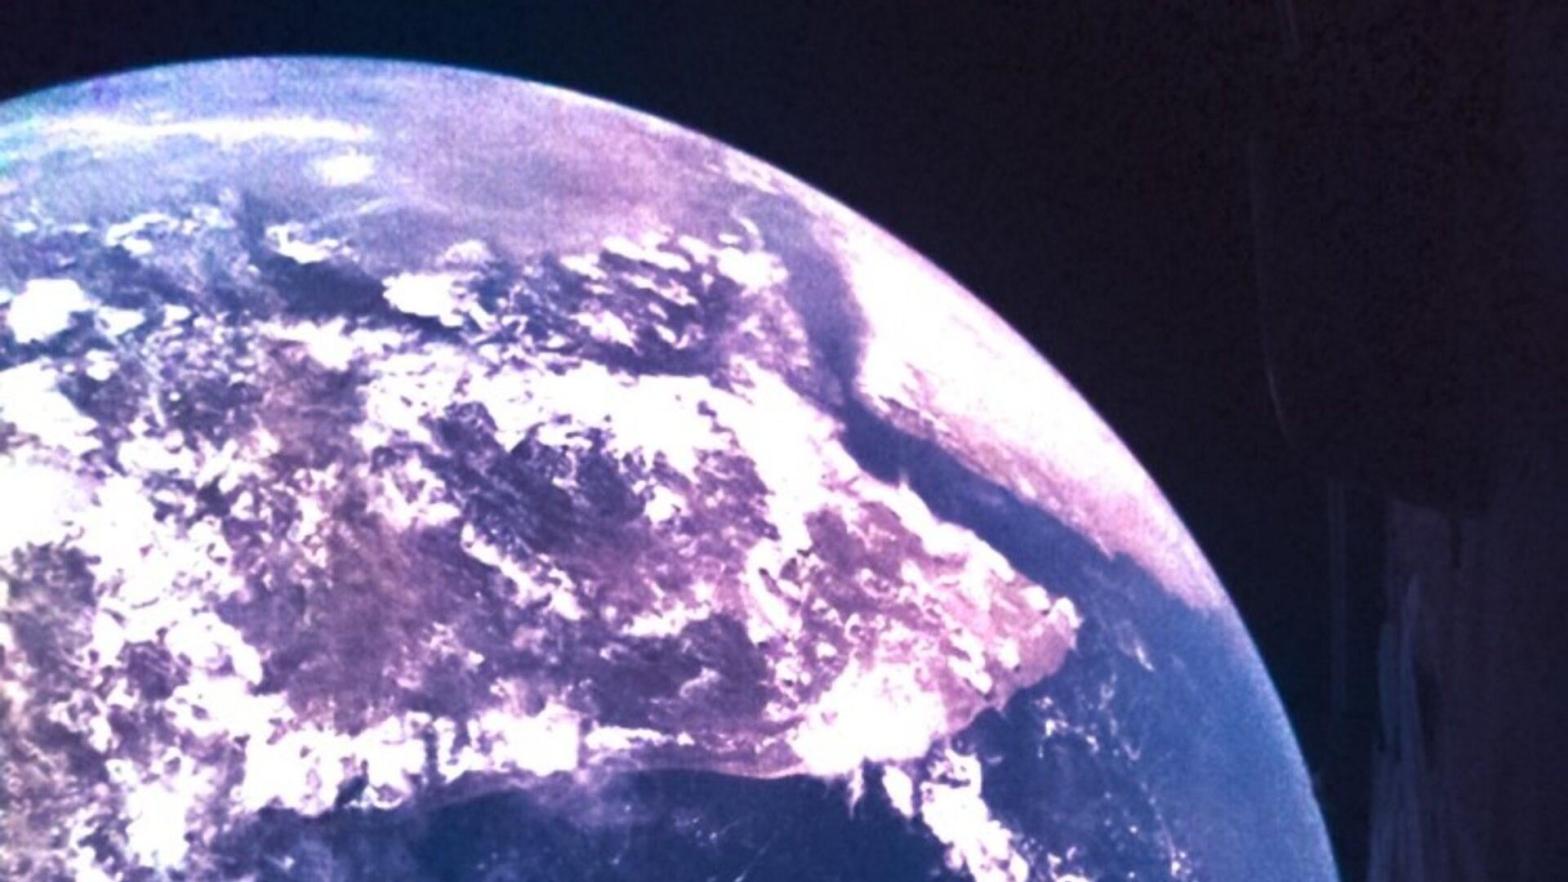 Shortly after launch, JUICE captured this image of Earth. (Image: ESA)